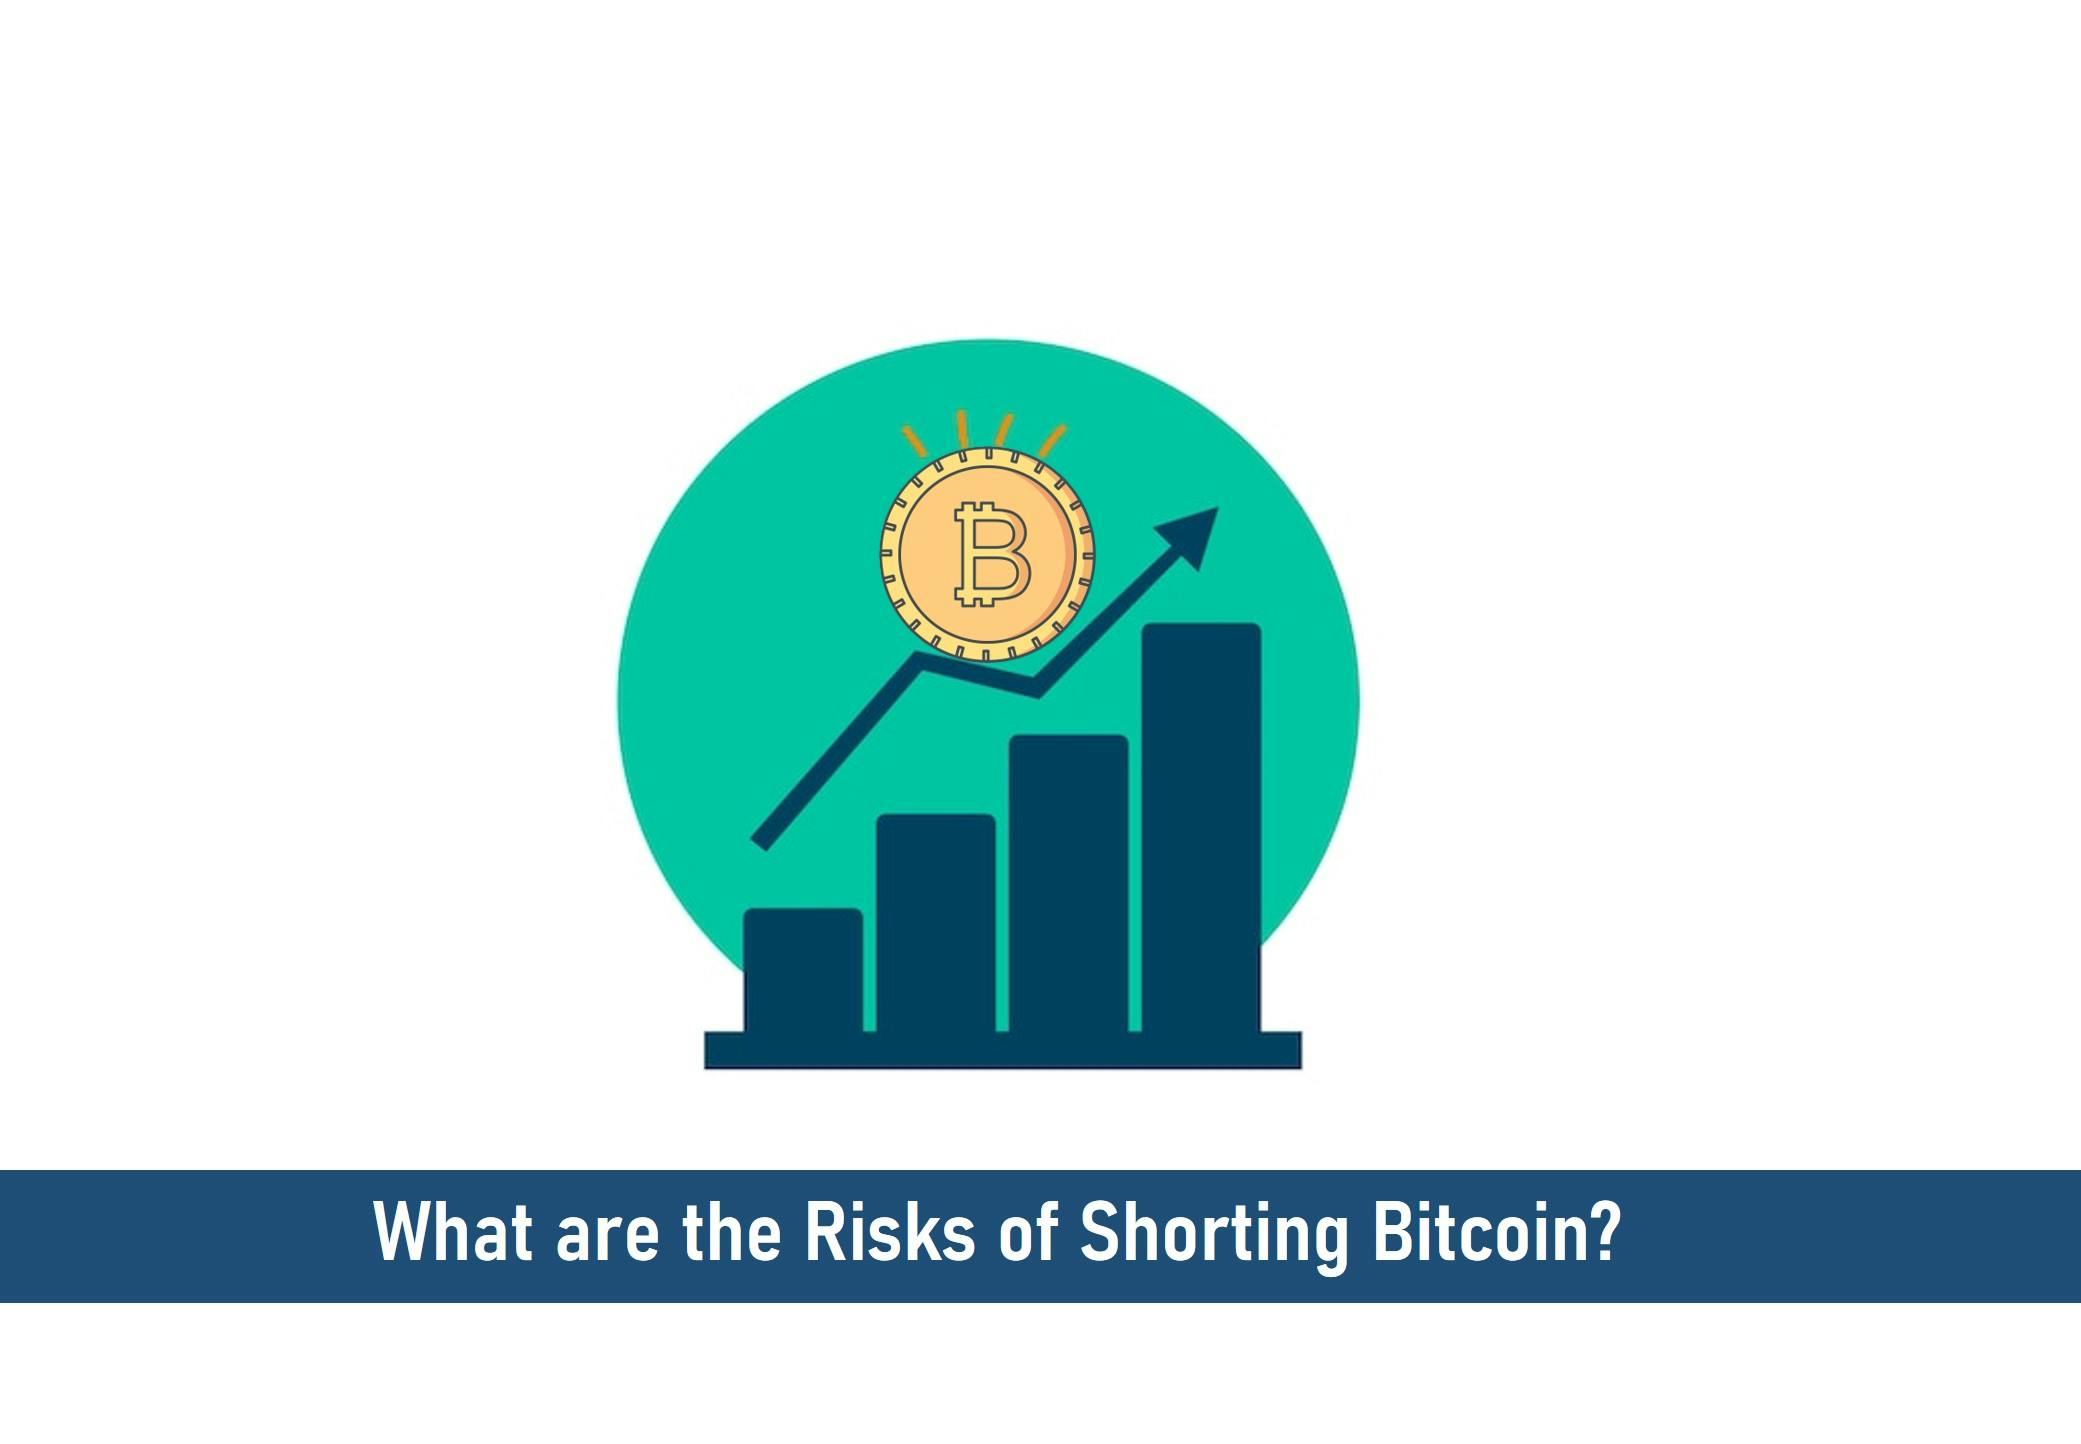 What are the Risks of Shorting Bitcoin?